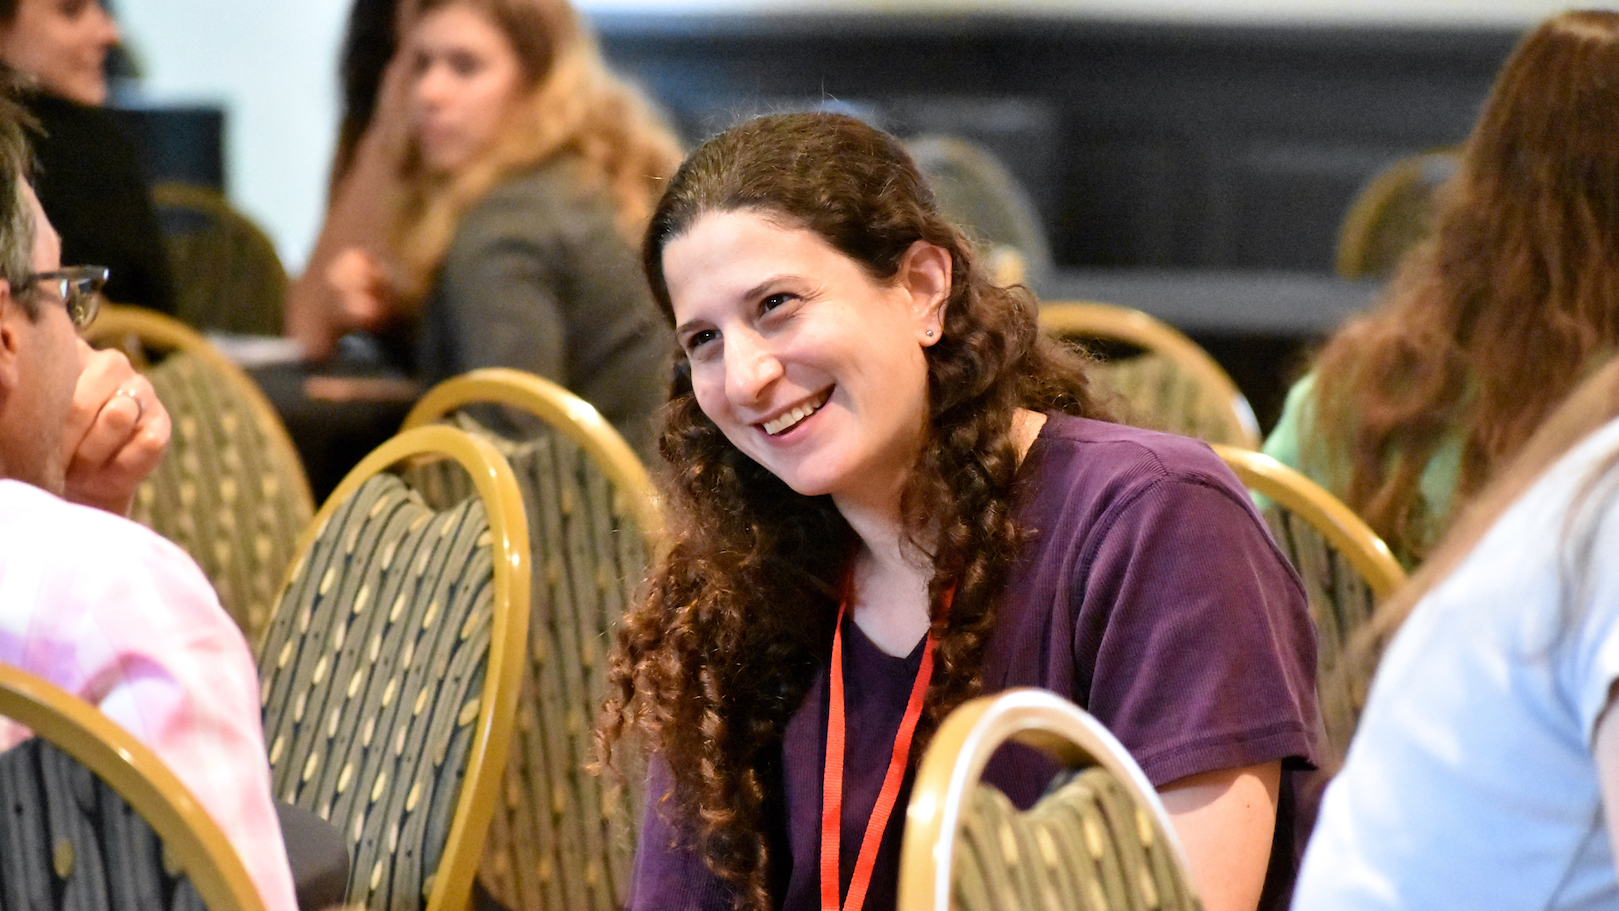 Professor Naomi Feldman, seated in three-quarter profile, looking leftwards towards an unseen partner in conversation, and laughing with focussed eyes